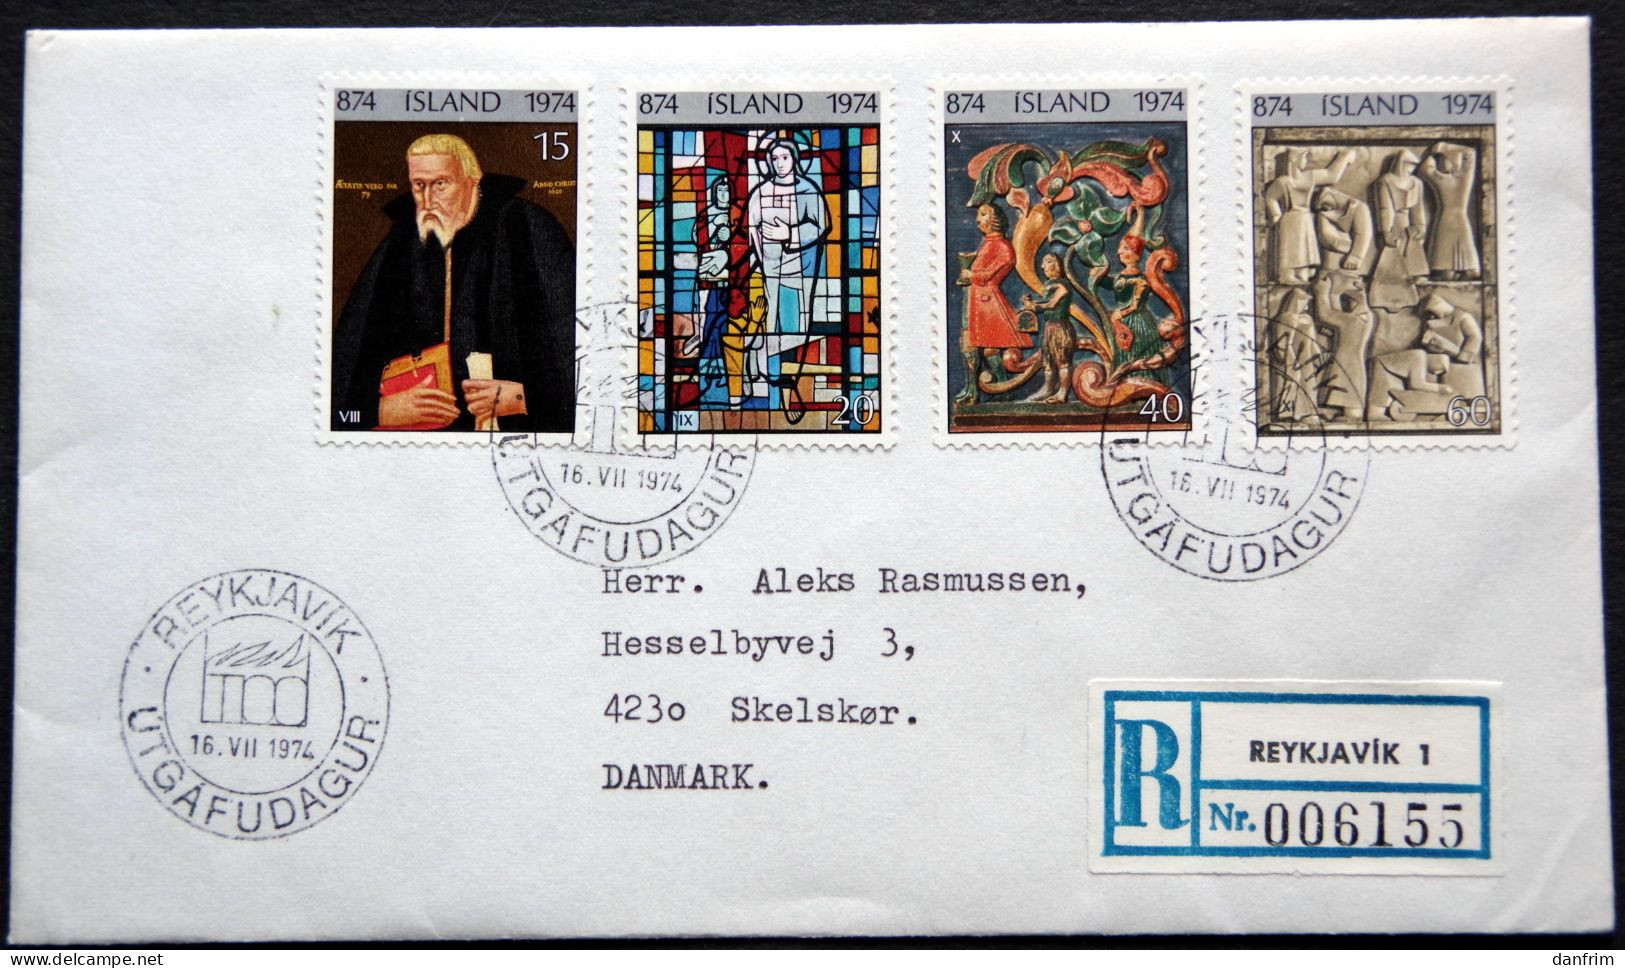 Iceland 1974     MiNr.494-97  FDC  ( Lot 6413 ) - FDC